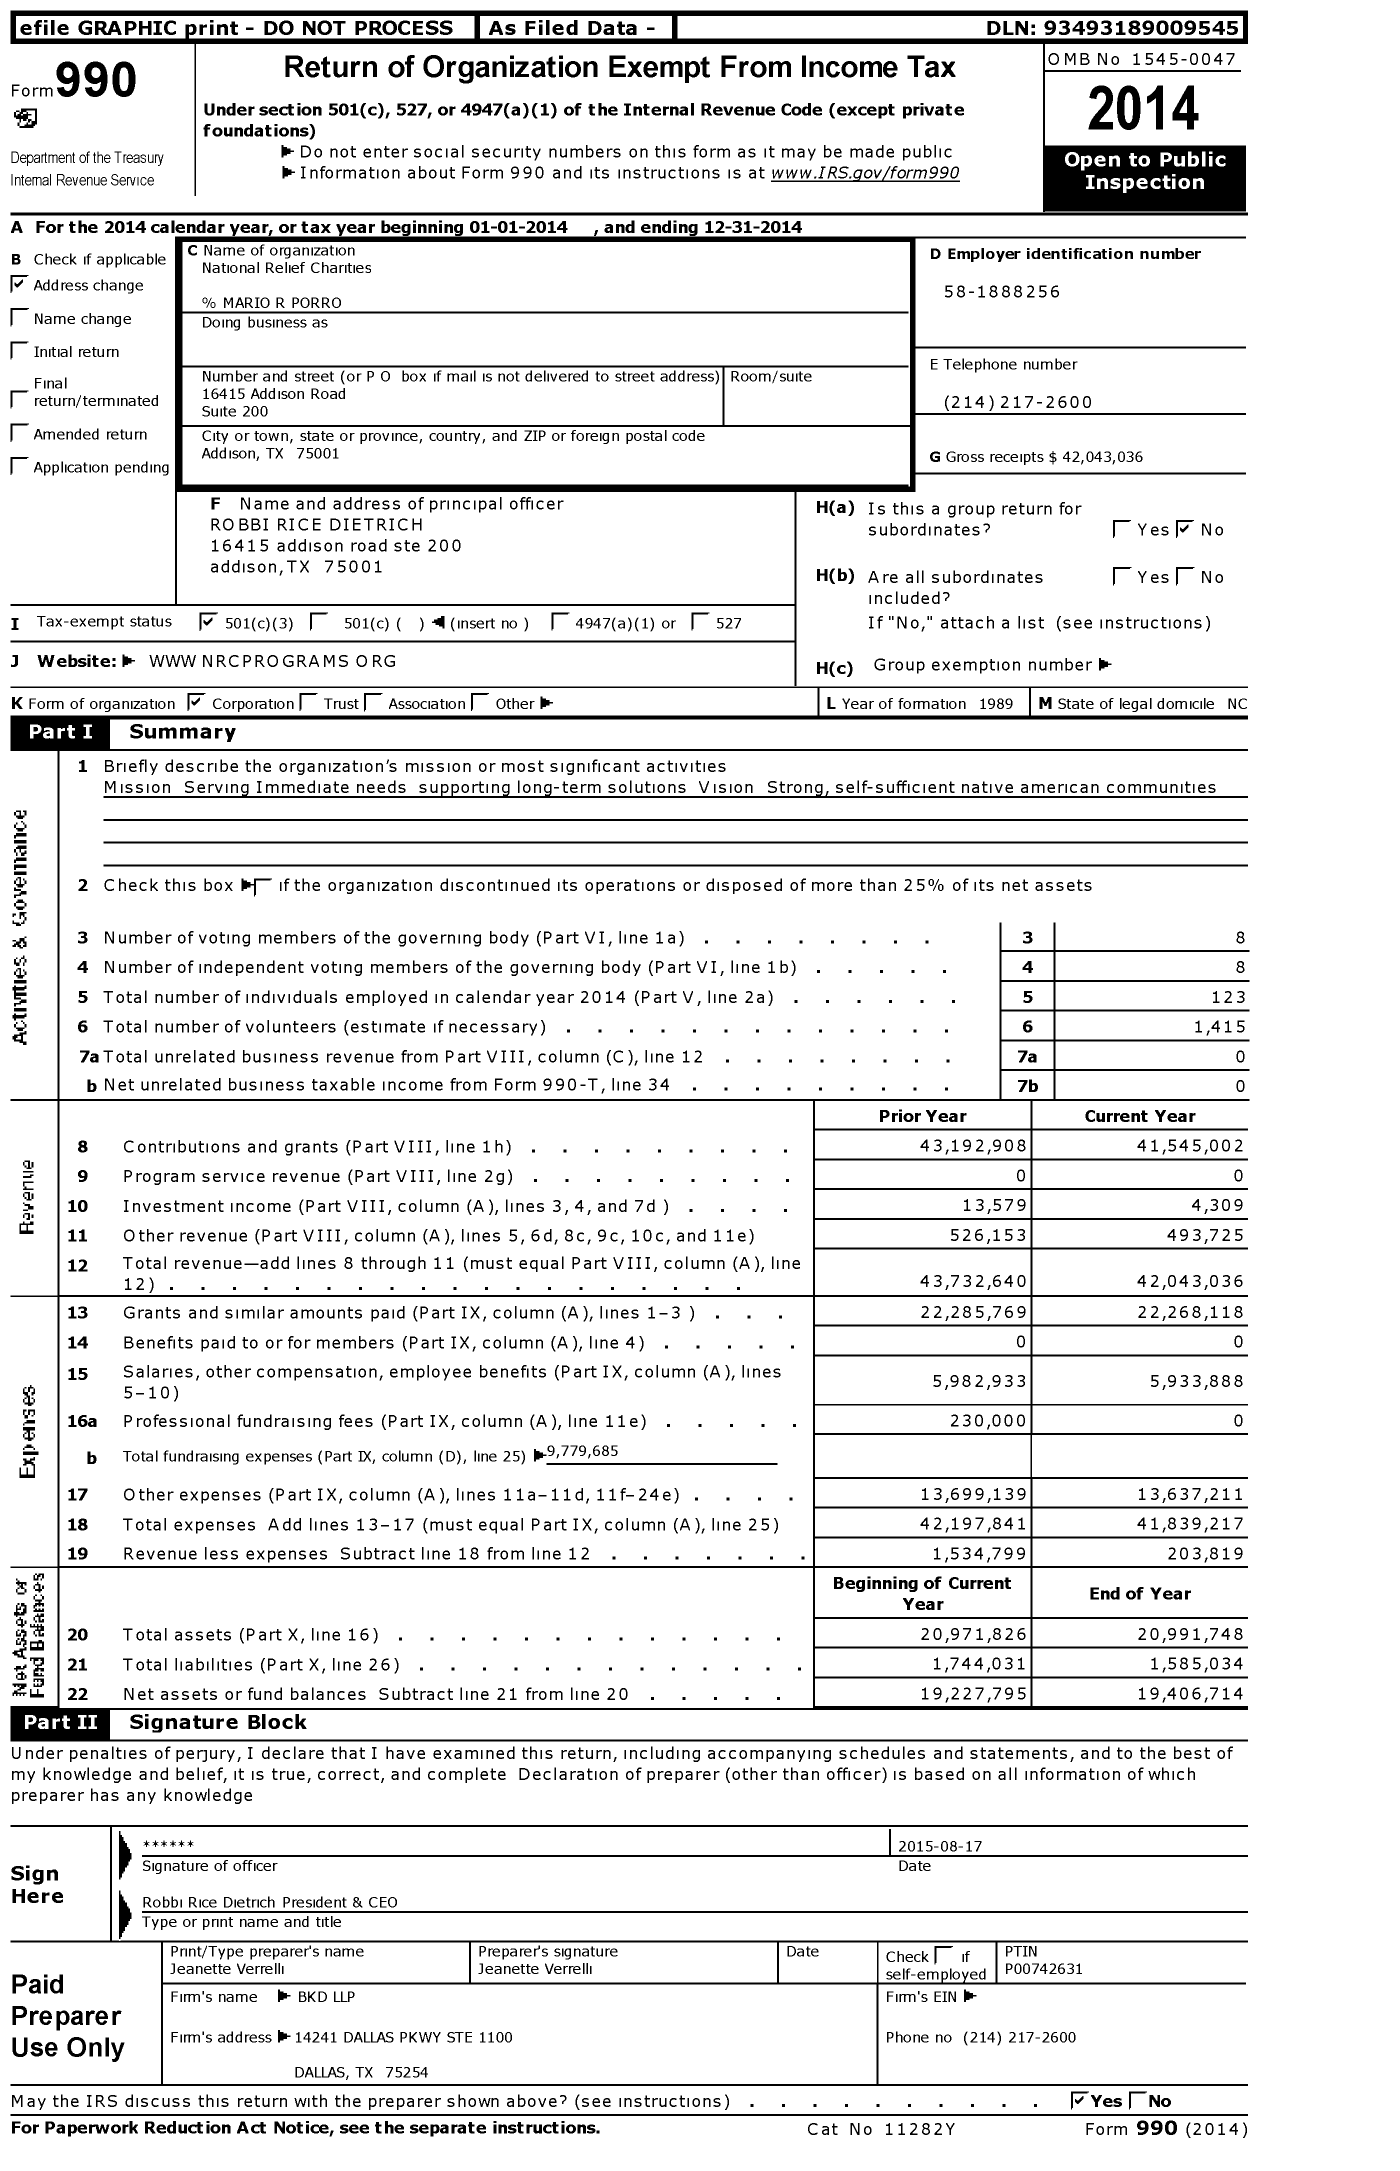 Image of first page of 2014 Form 990 for National Relief Charities (NRC)